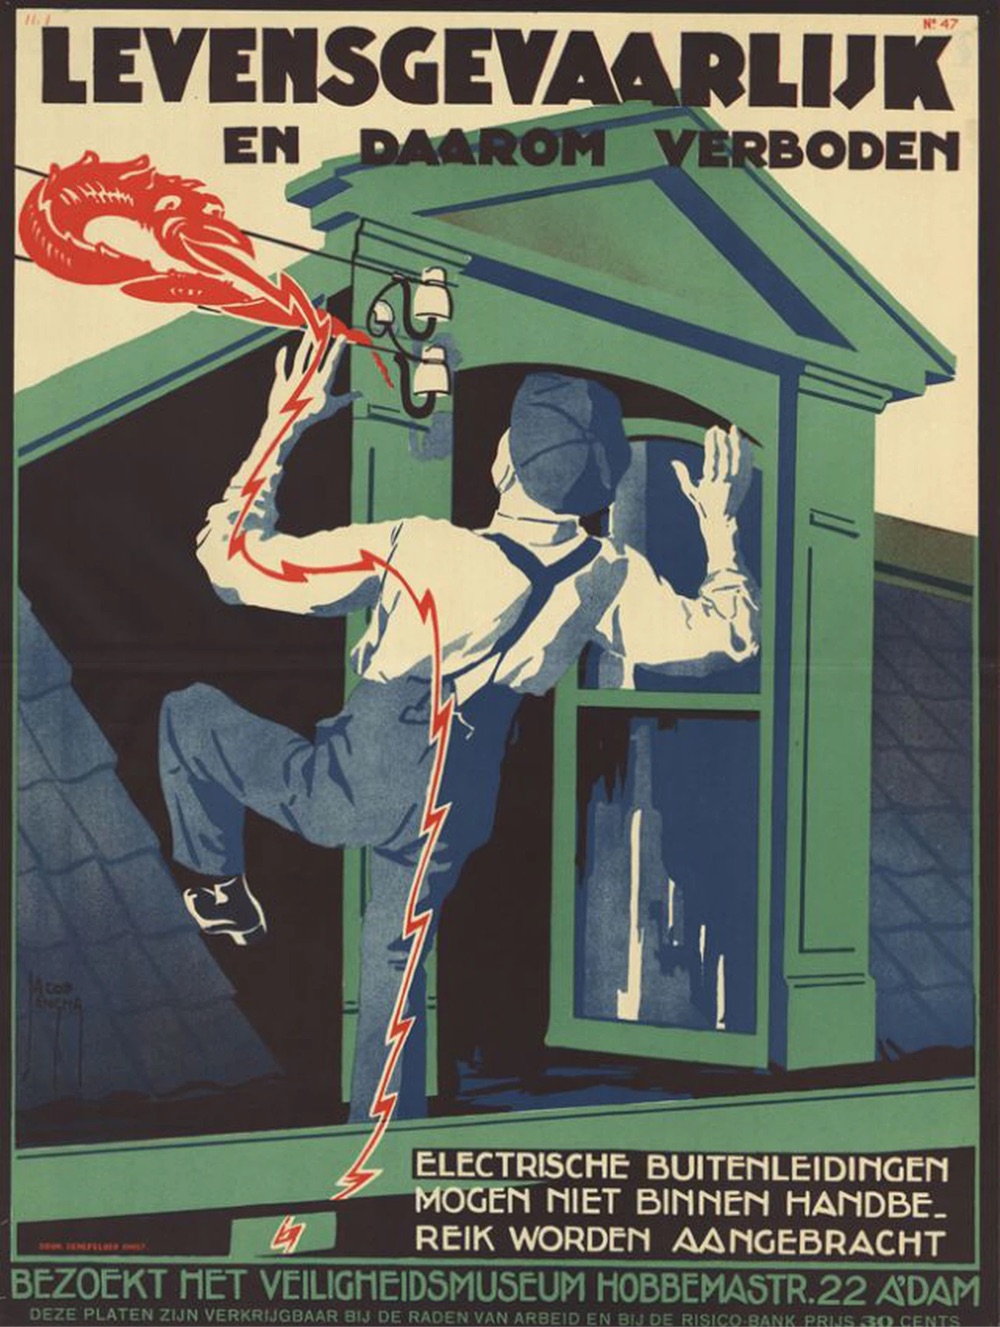 vintage Dutch safety poster showing someone getting electrocuted